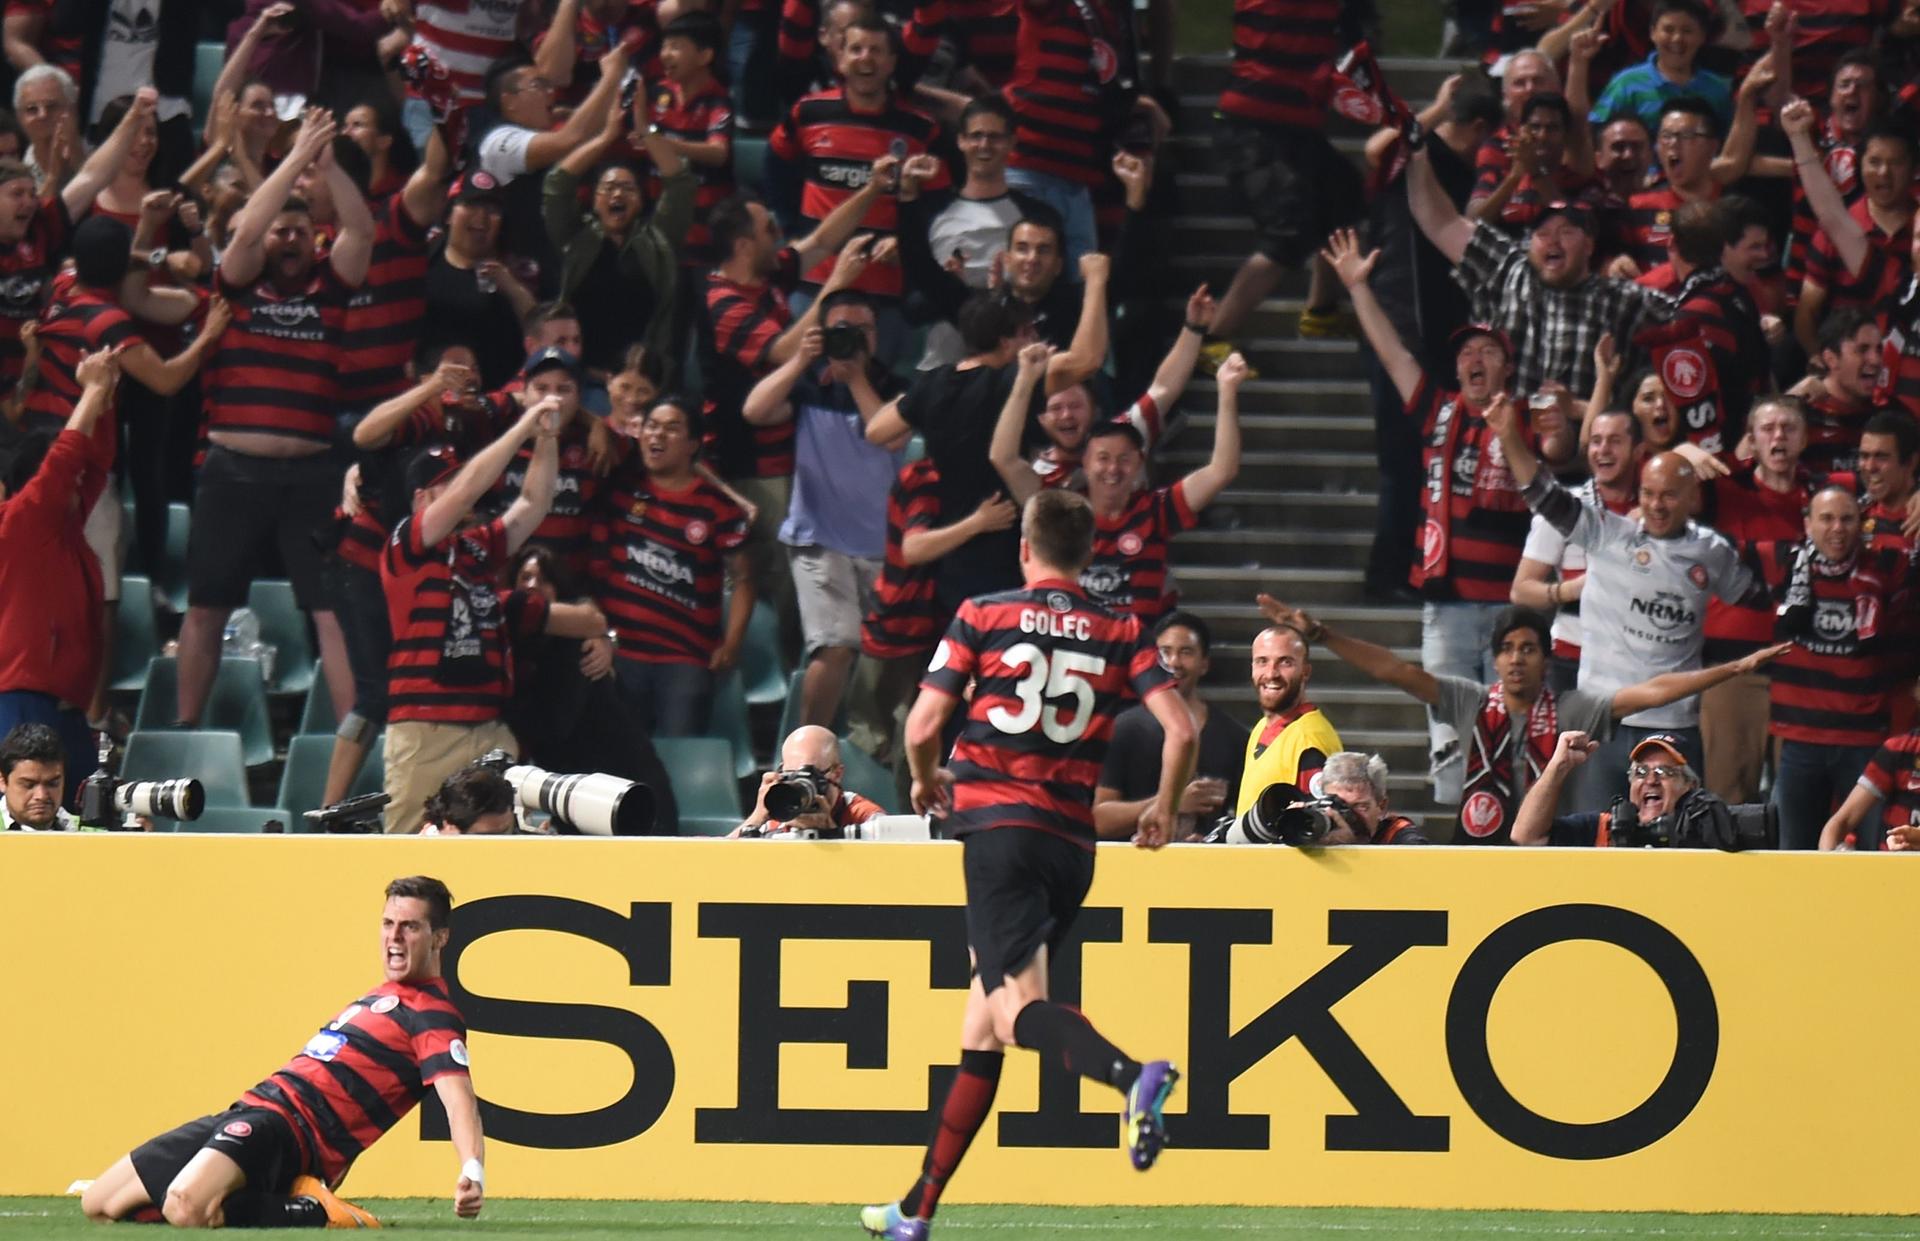 Tomi Juric gave the Wanderers a 1-0 win in the first leg. Photo: AFP